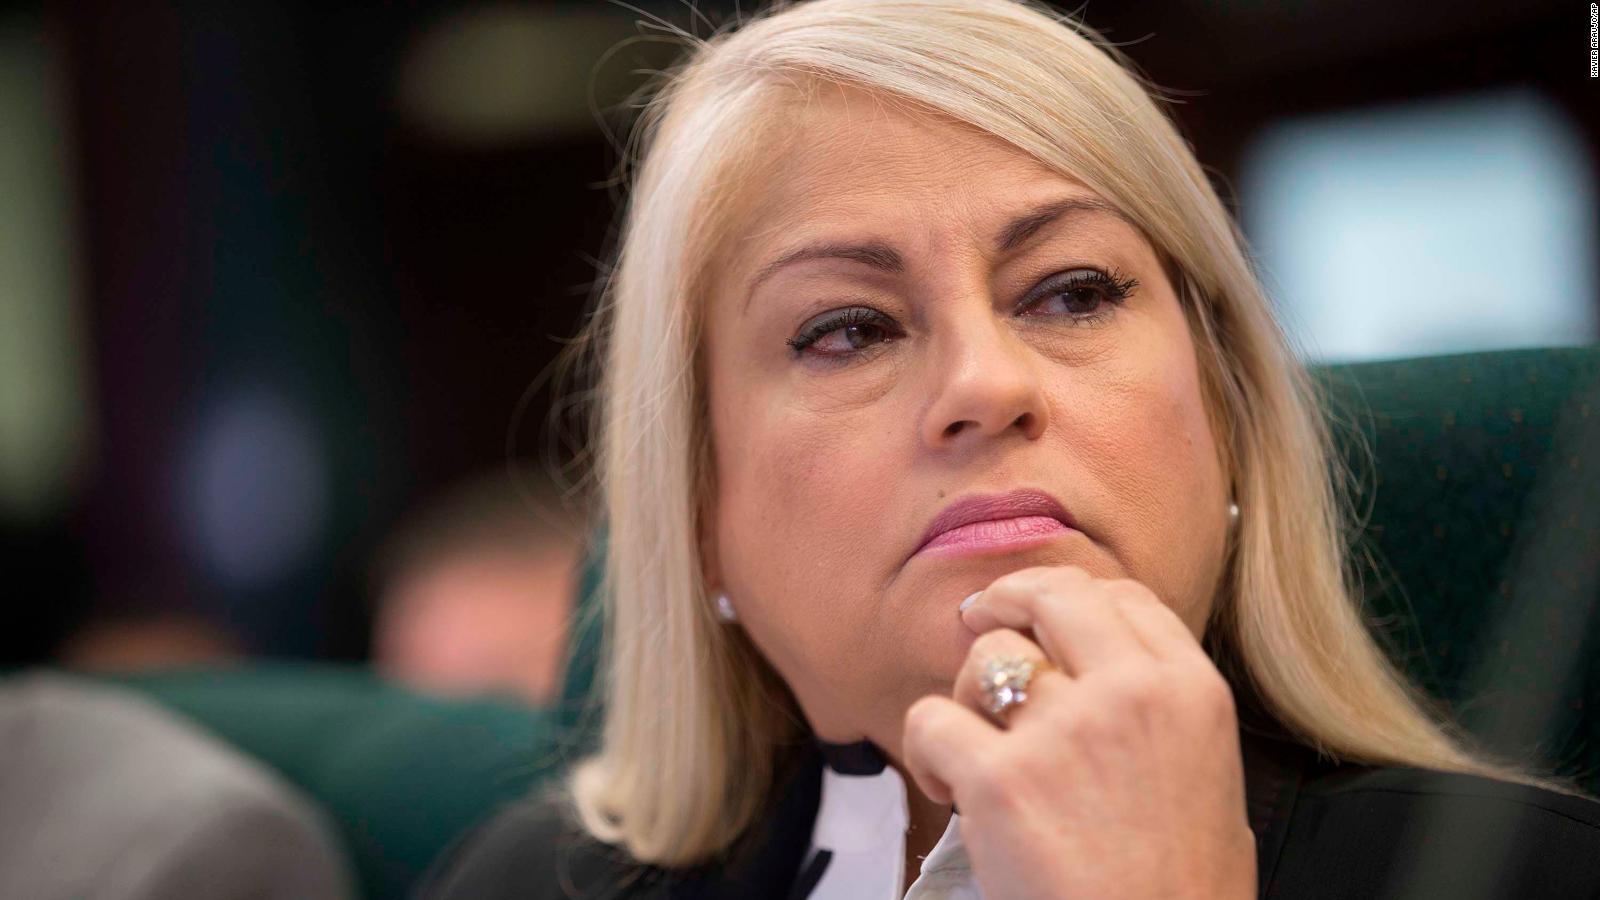 Wanda Vasquez, the former governor of Puerto Rico, was accused of corruption during her 2020 campaign.